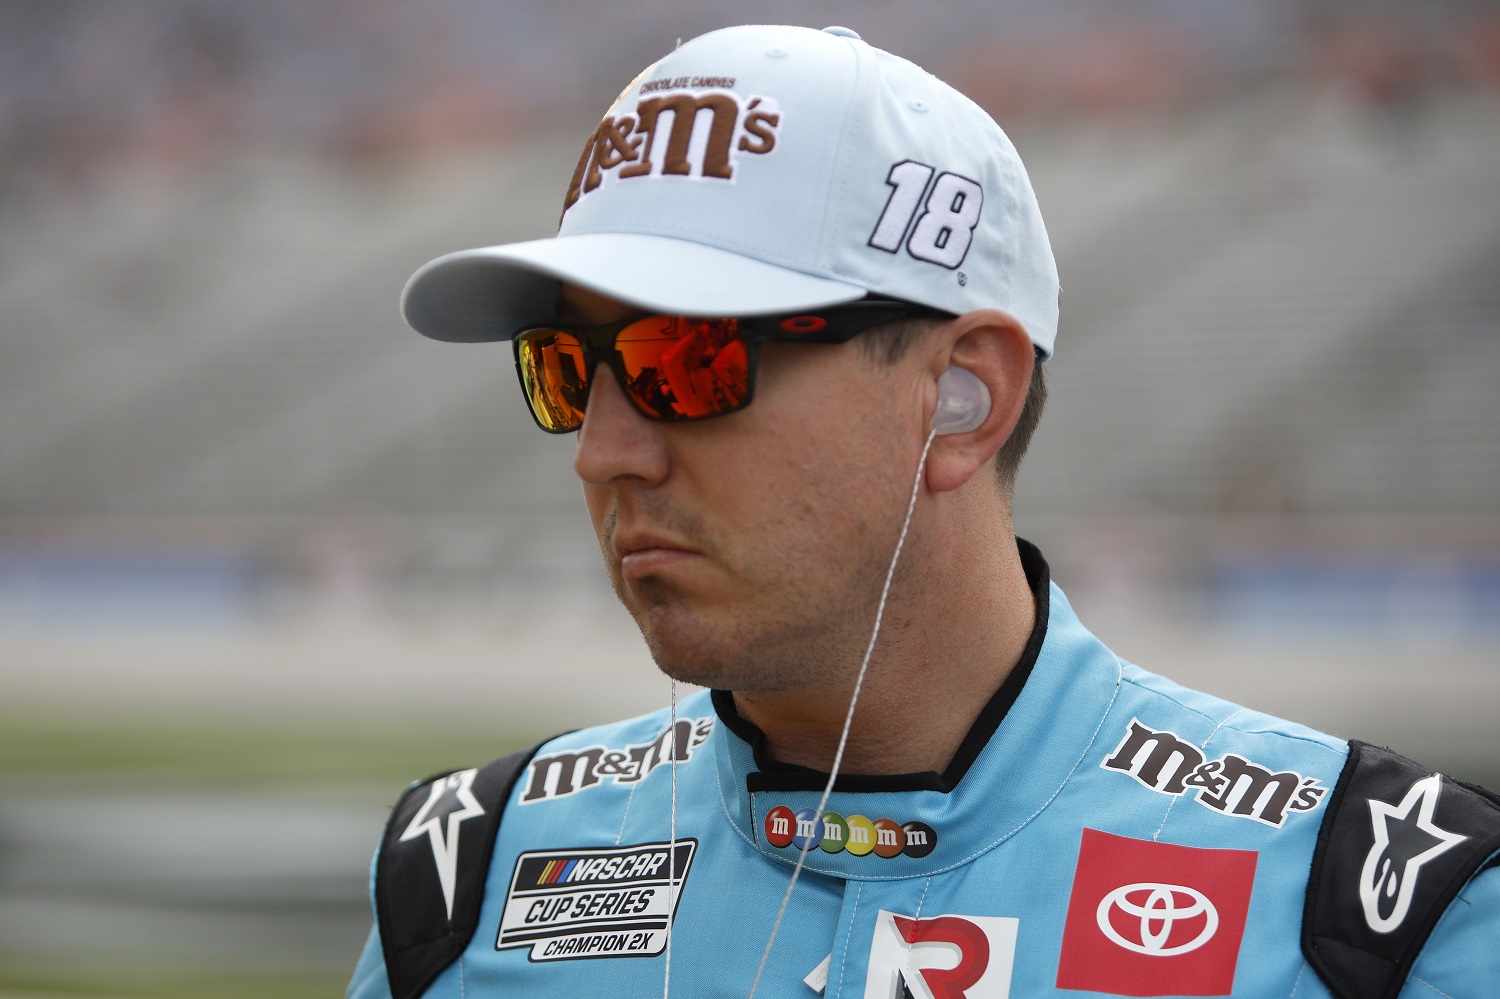 Kyle Busch during practice for the NASCAR Cup Series All-Star Race at Texas Motor Speedway on May 21, 2022.